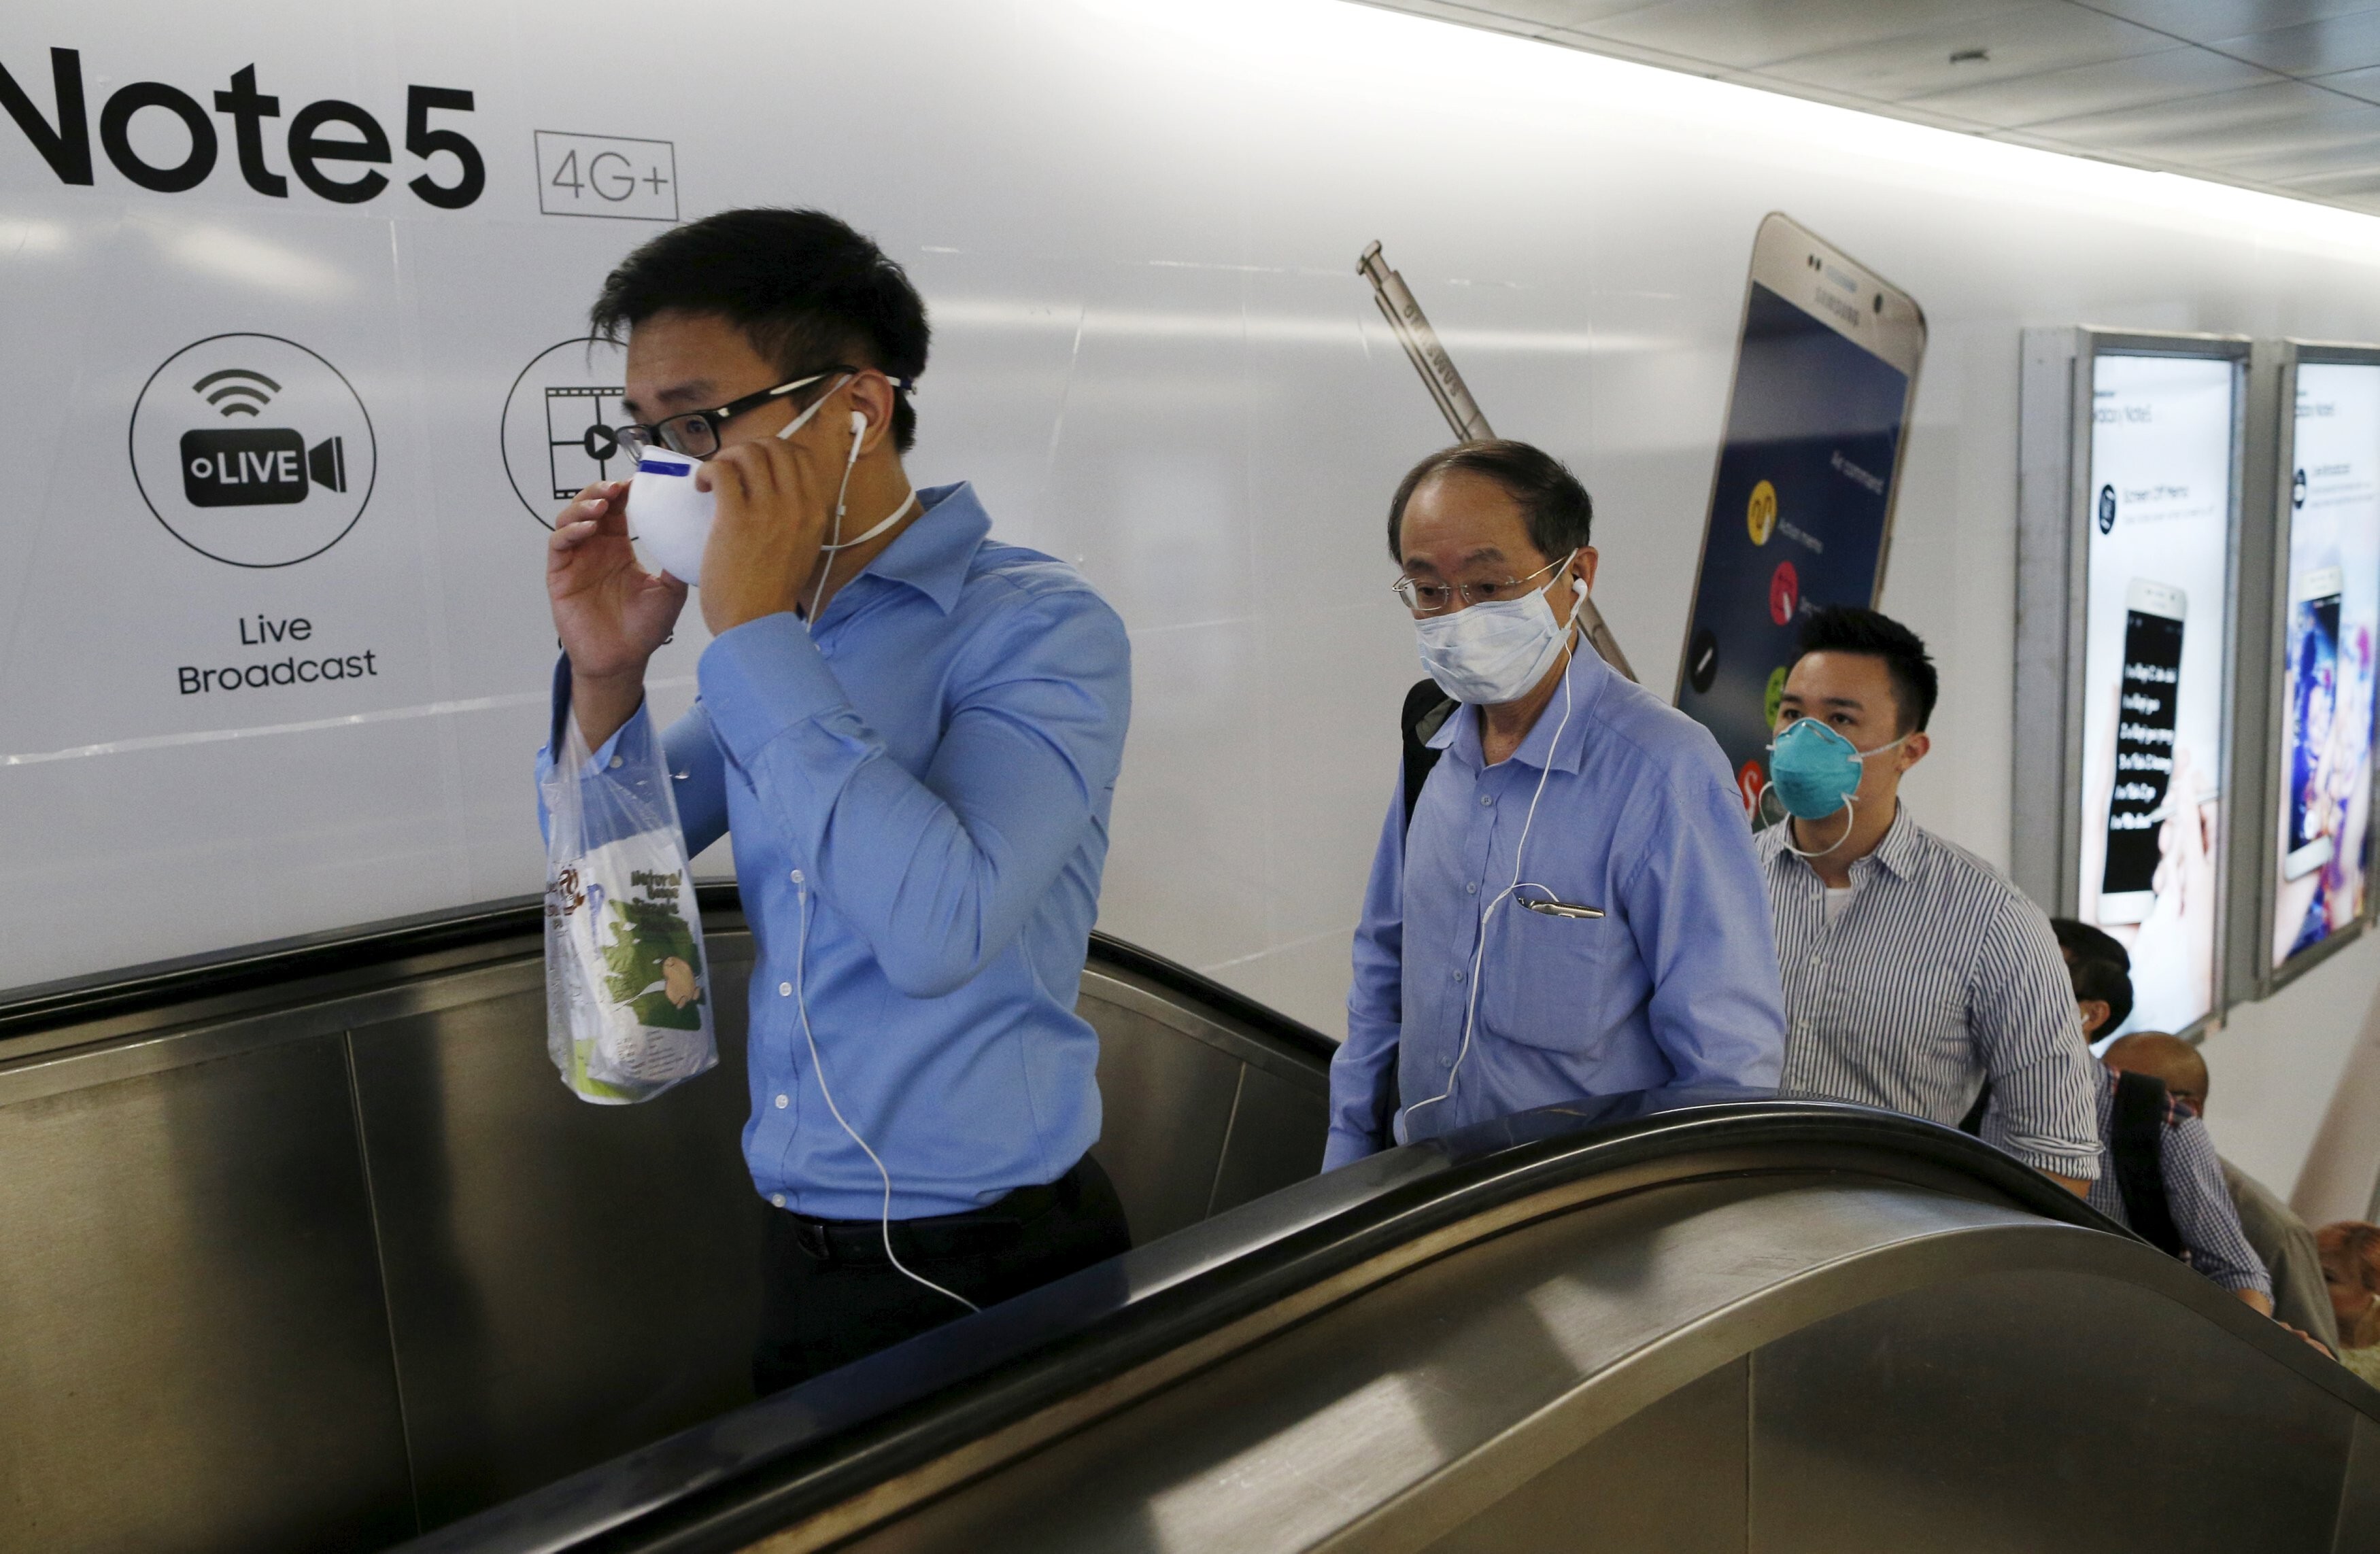 Singaporean officer workers wearing masks leave a train station during the morning commute. Photo: Reuters